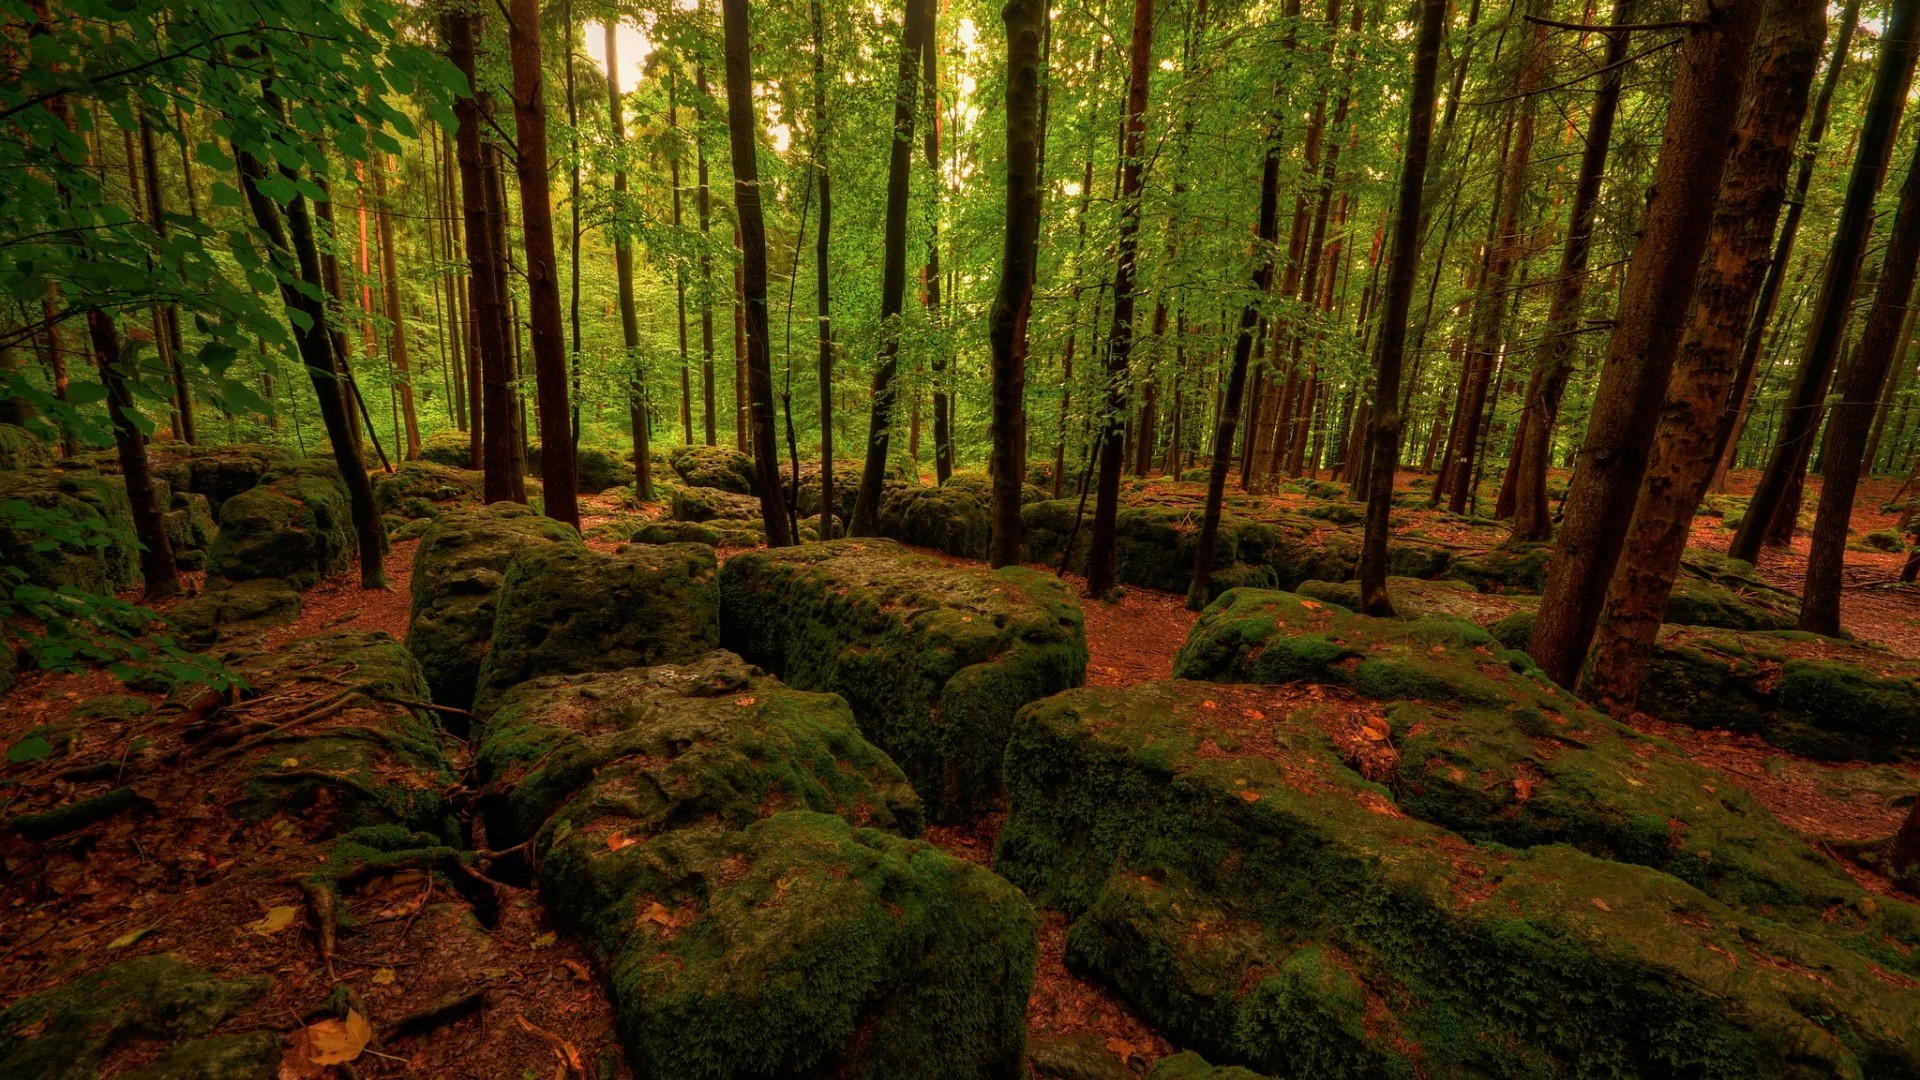 General 1920x1080 nature trees forest branch leaves rocks moss dead trees